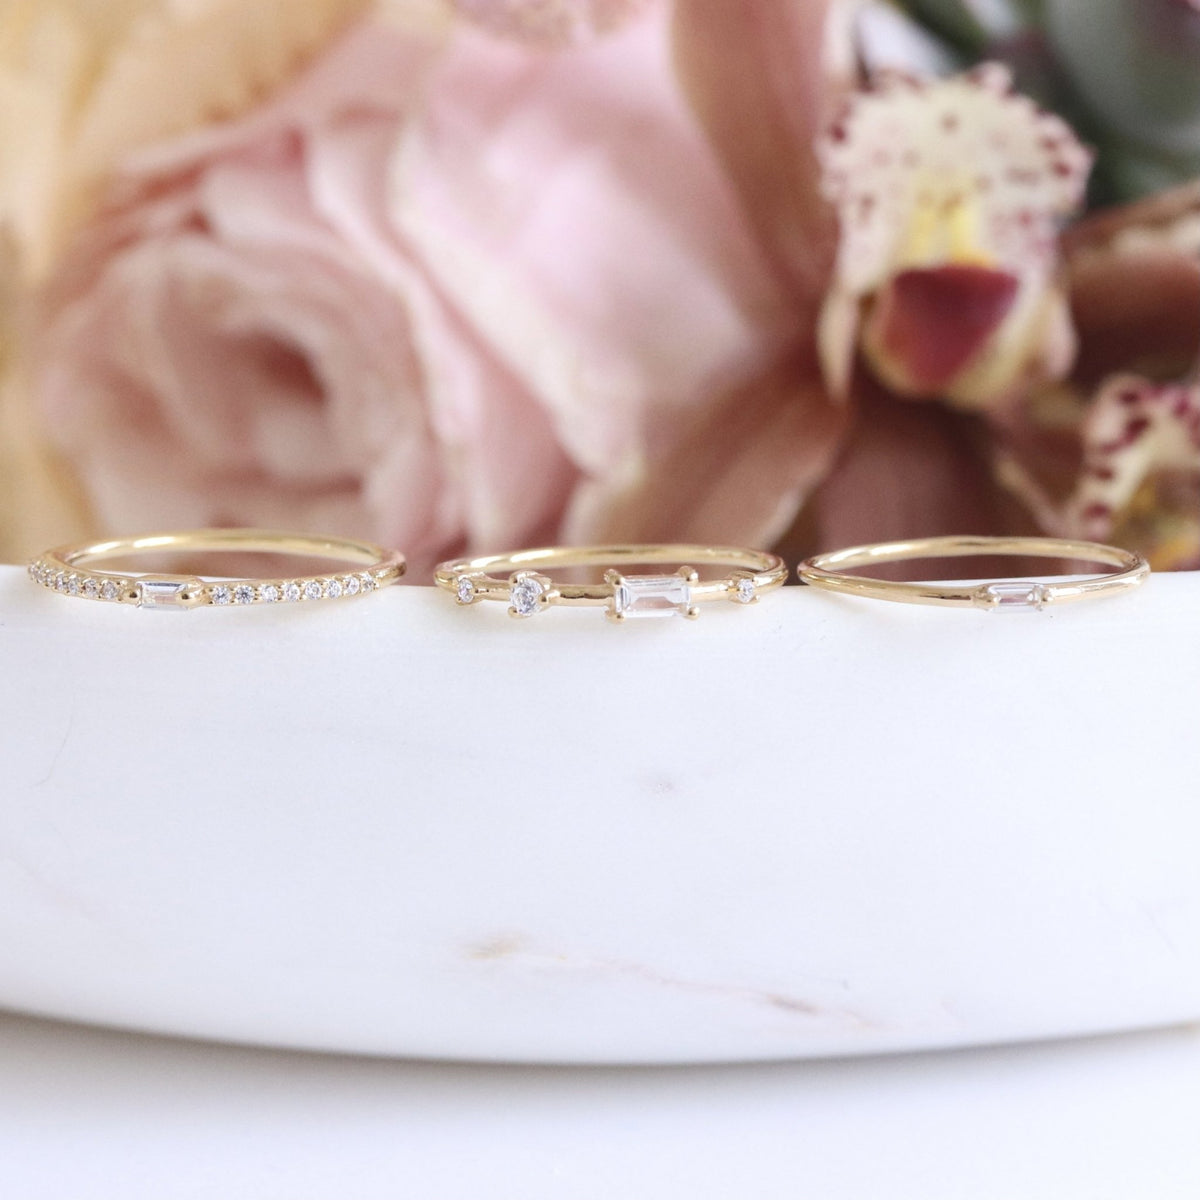 Loyal Dancing Stacking Ring - White Topaz, Cubic Zirconia &amp; Gold - SO PRETTY CARA COTTER